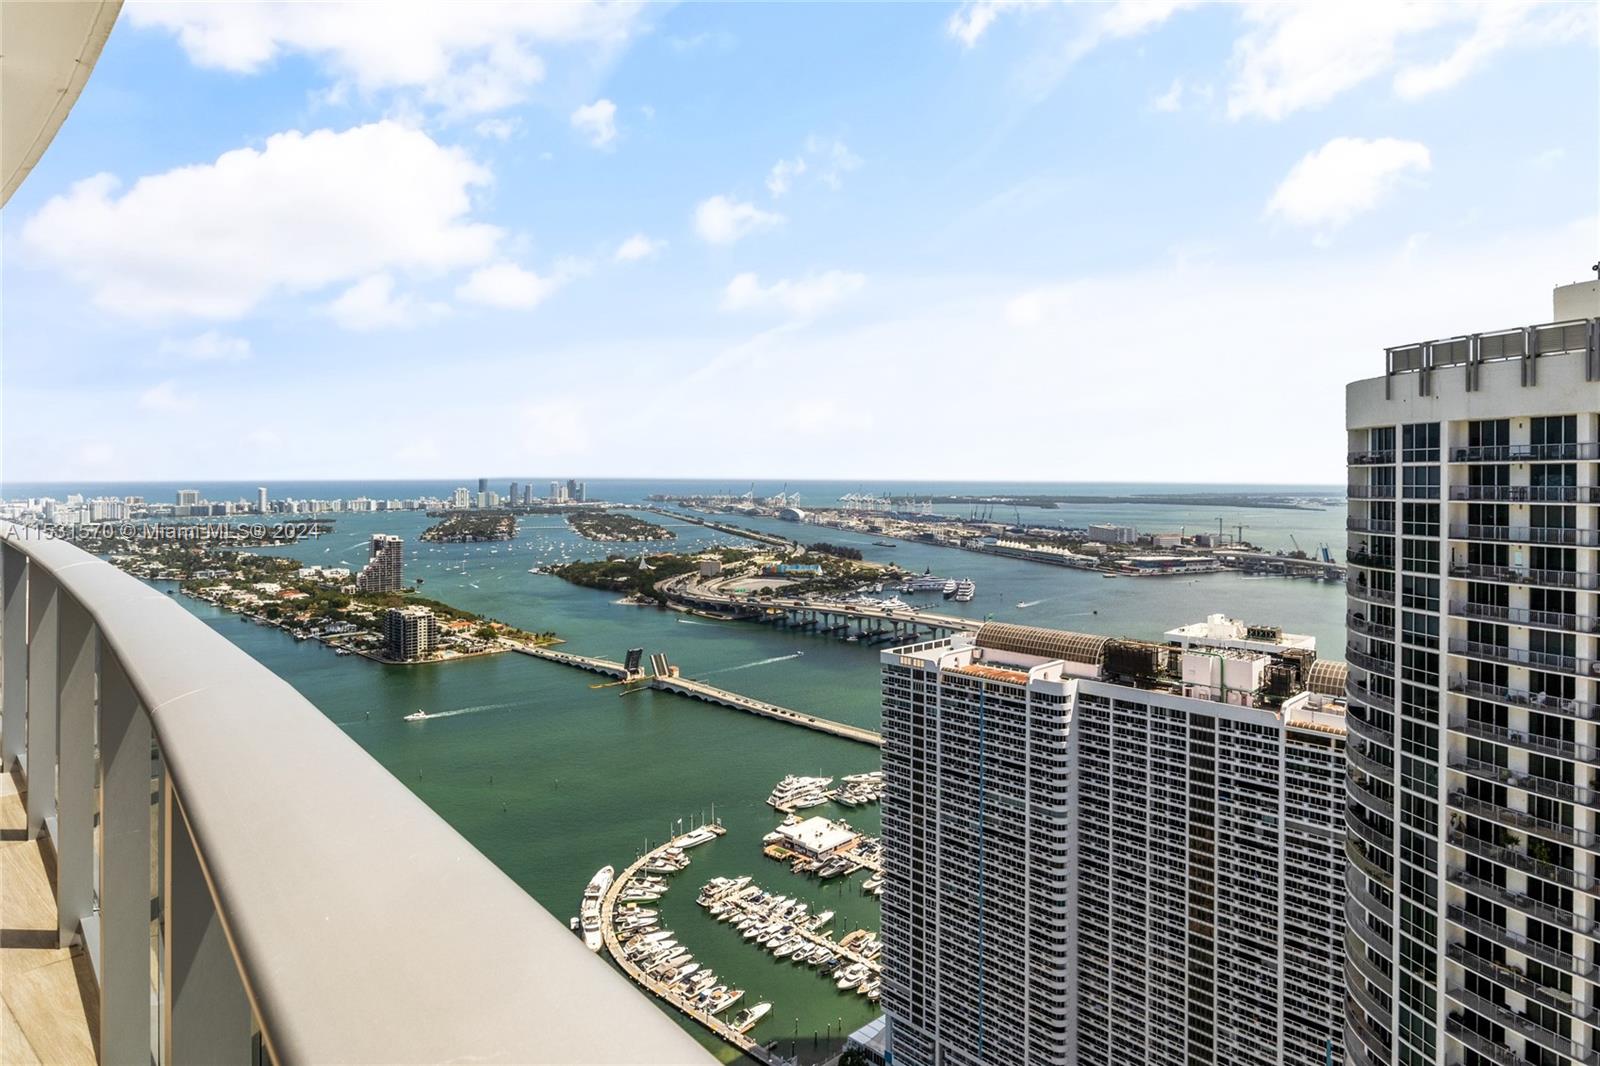 This is a must see! One of the few penthouse in the building with gorgeous bay and city view. Located in the very desirable neighborhood of edgewater in the heart of Miami and a few block from design district, near restaurants and shop and a min drive to brickell and miami airport. This luxury apartment has 2 master bedrooms with additional full bathroom. Quartz counters and stainless steel appliances in kitchen. More than $150K in upgrades makes this apartment unique. Five star resort style amenities include BBQ area, Spa/Sauna, Business Center, fitness center, yoga and pilates studio, kids playground, movie theater, sunset to sunrise heated pools and more.